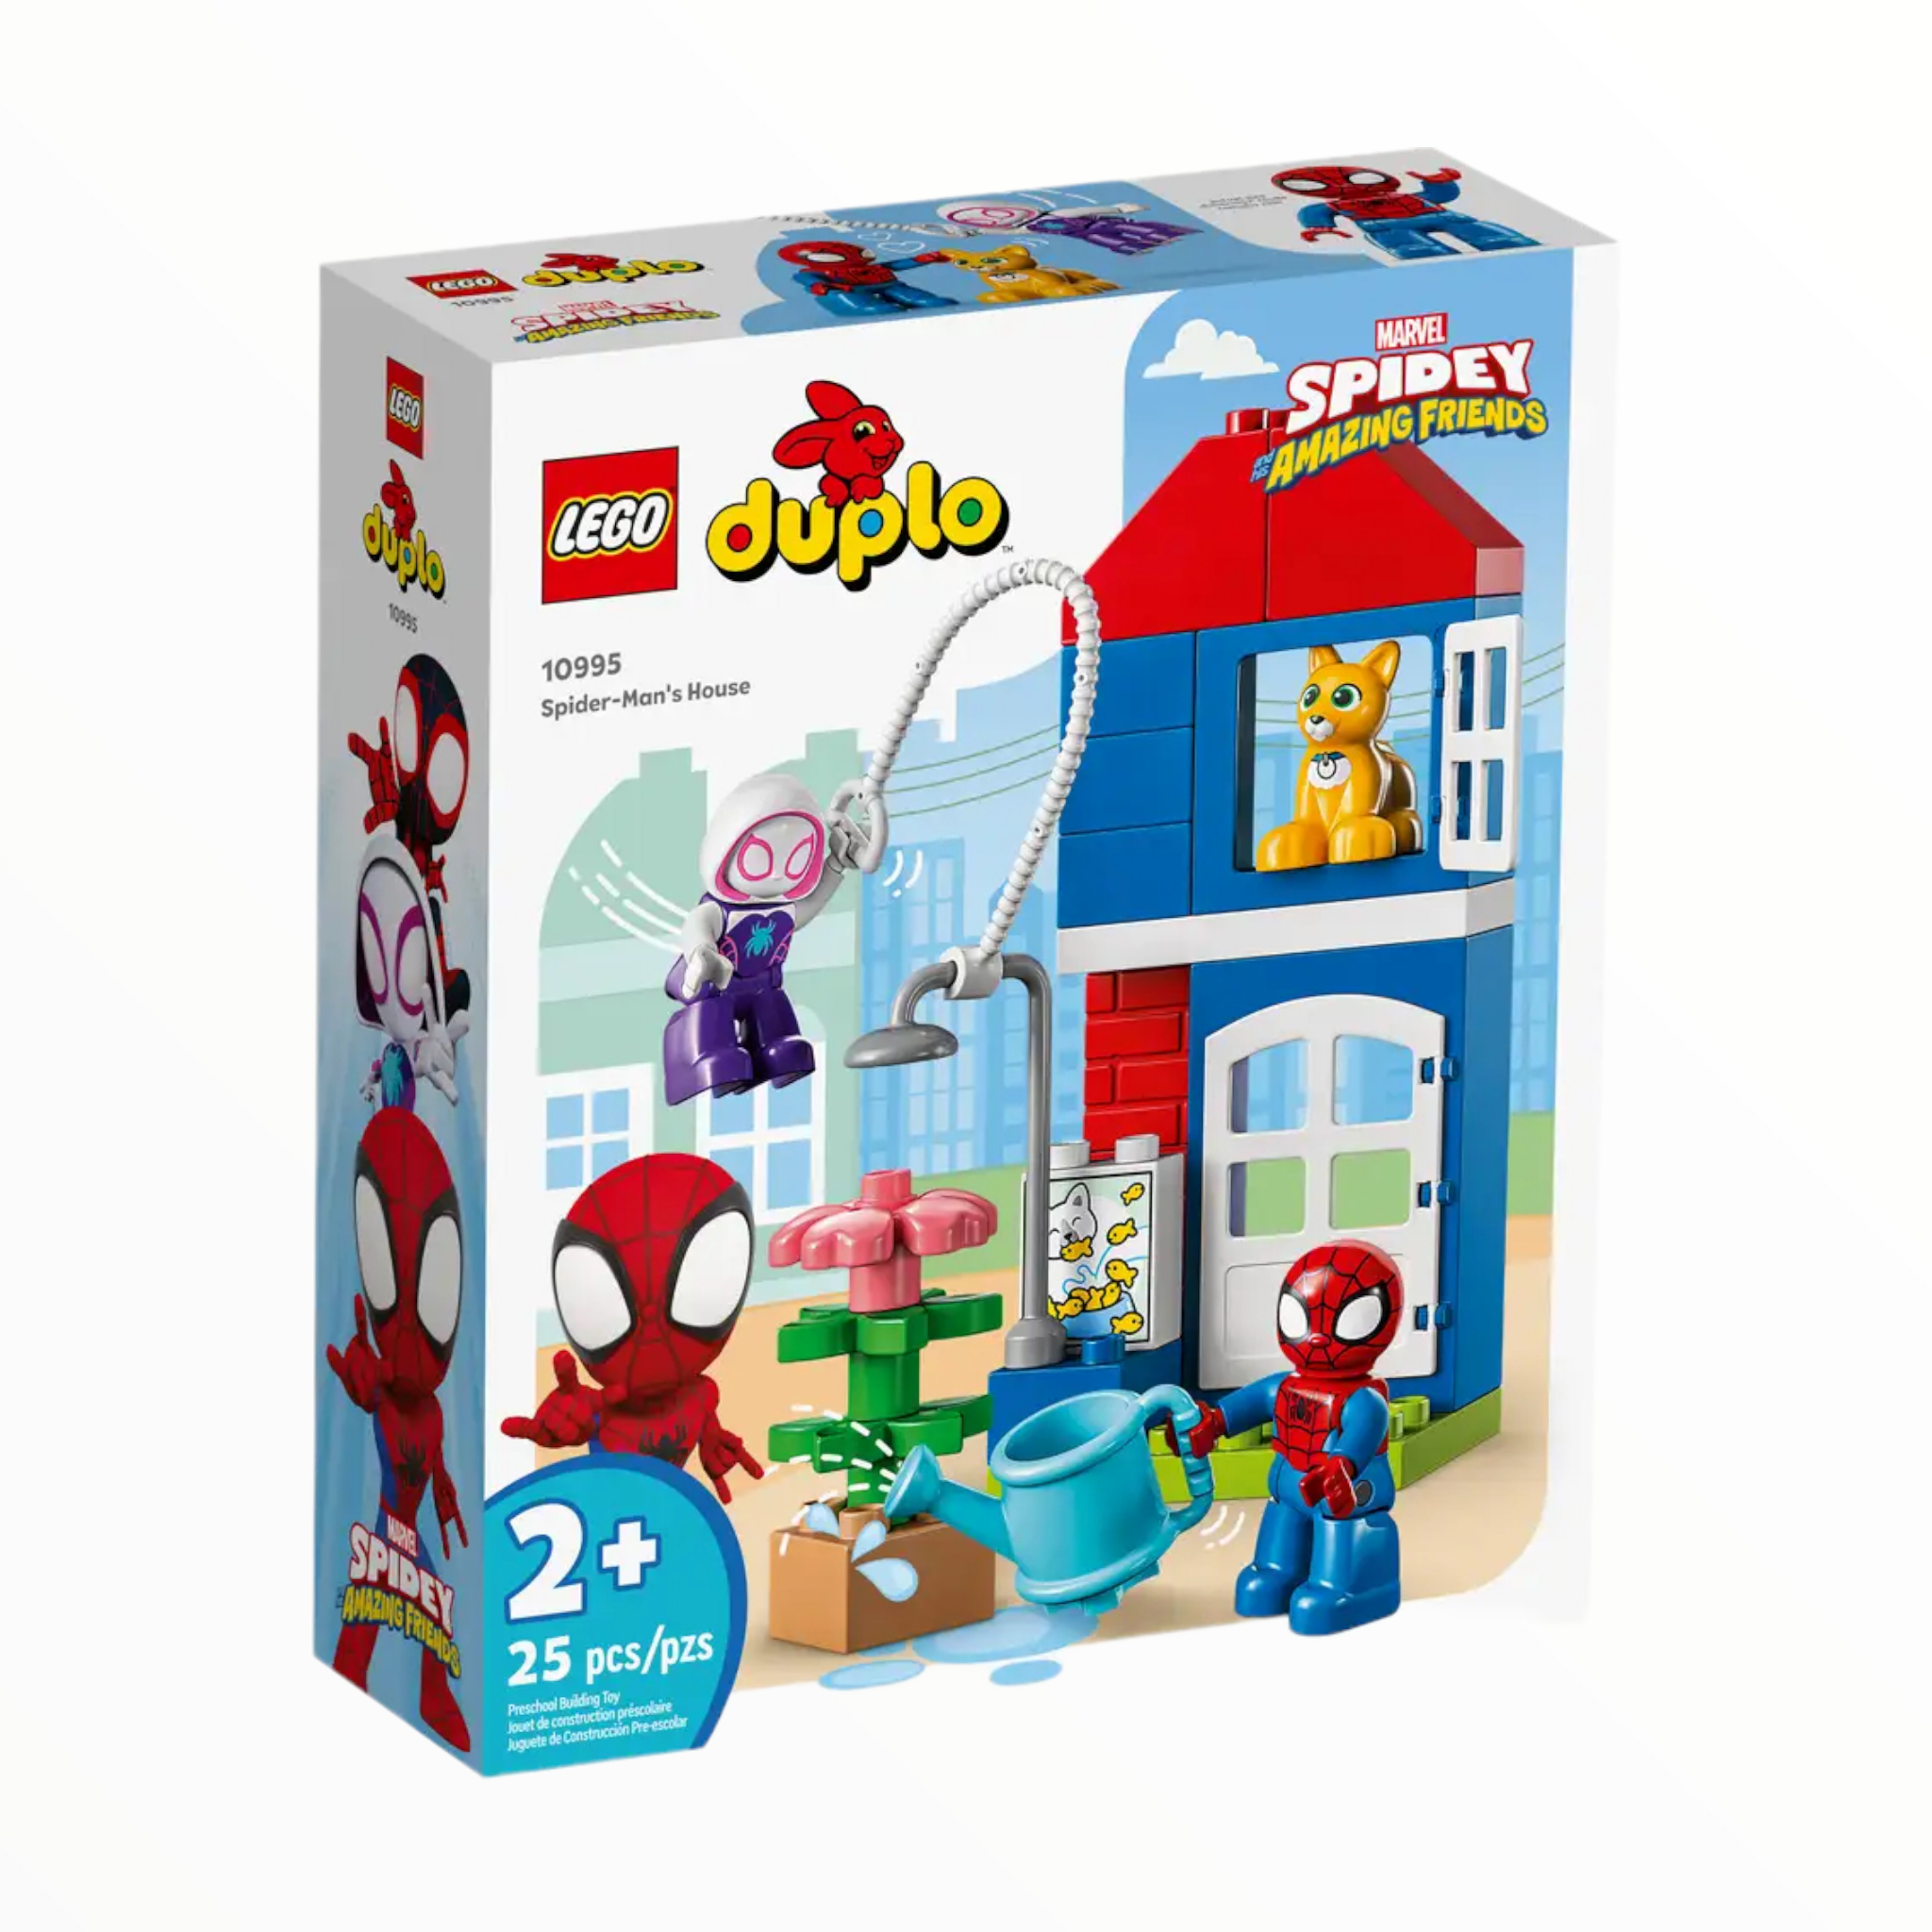 10995 Spidey and his Amazing Friends Spider-Man’s House